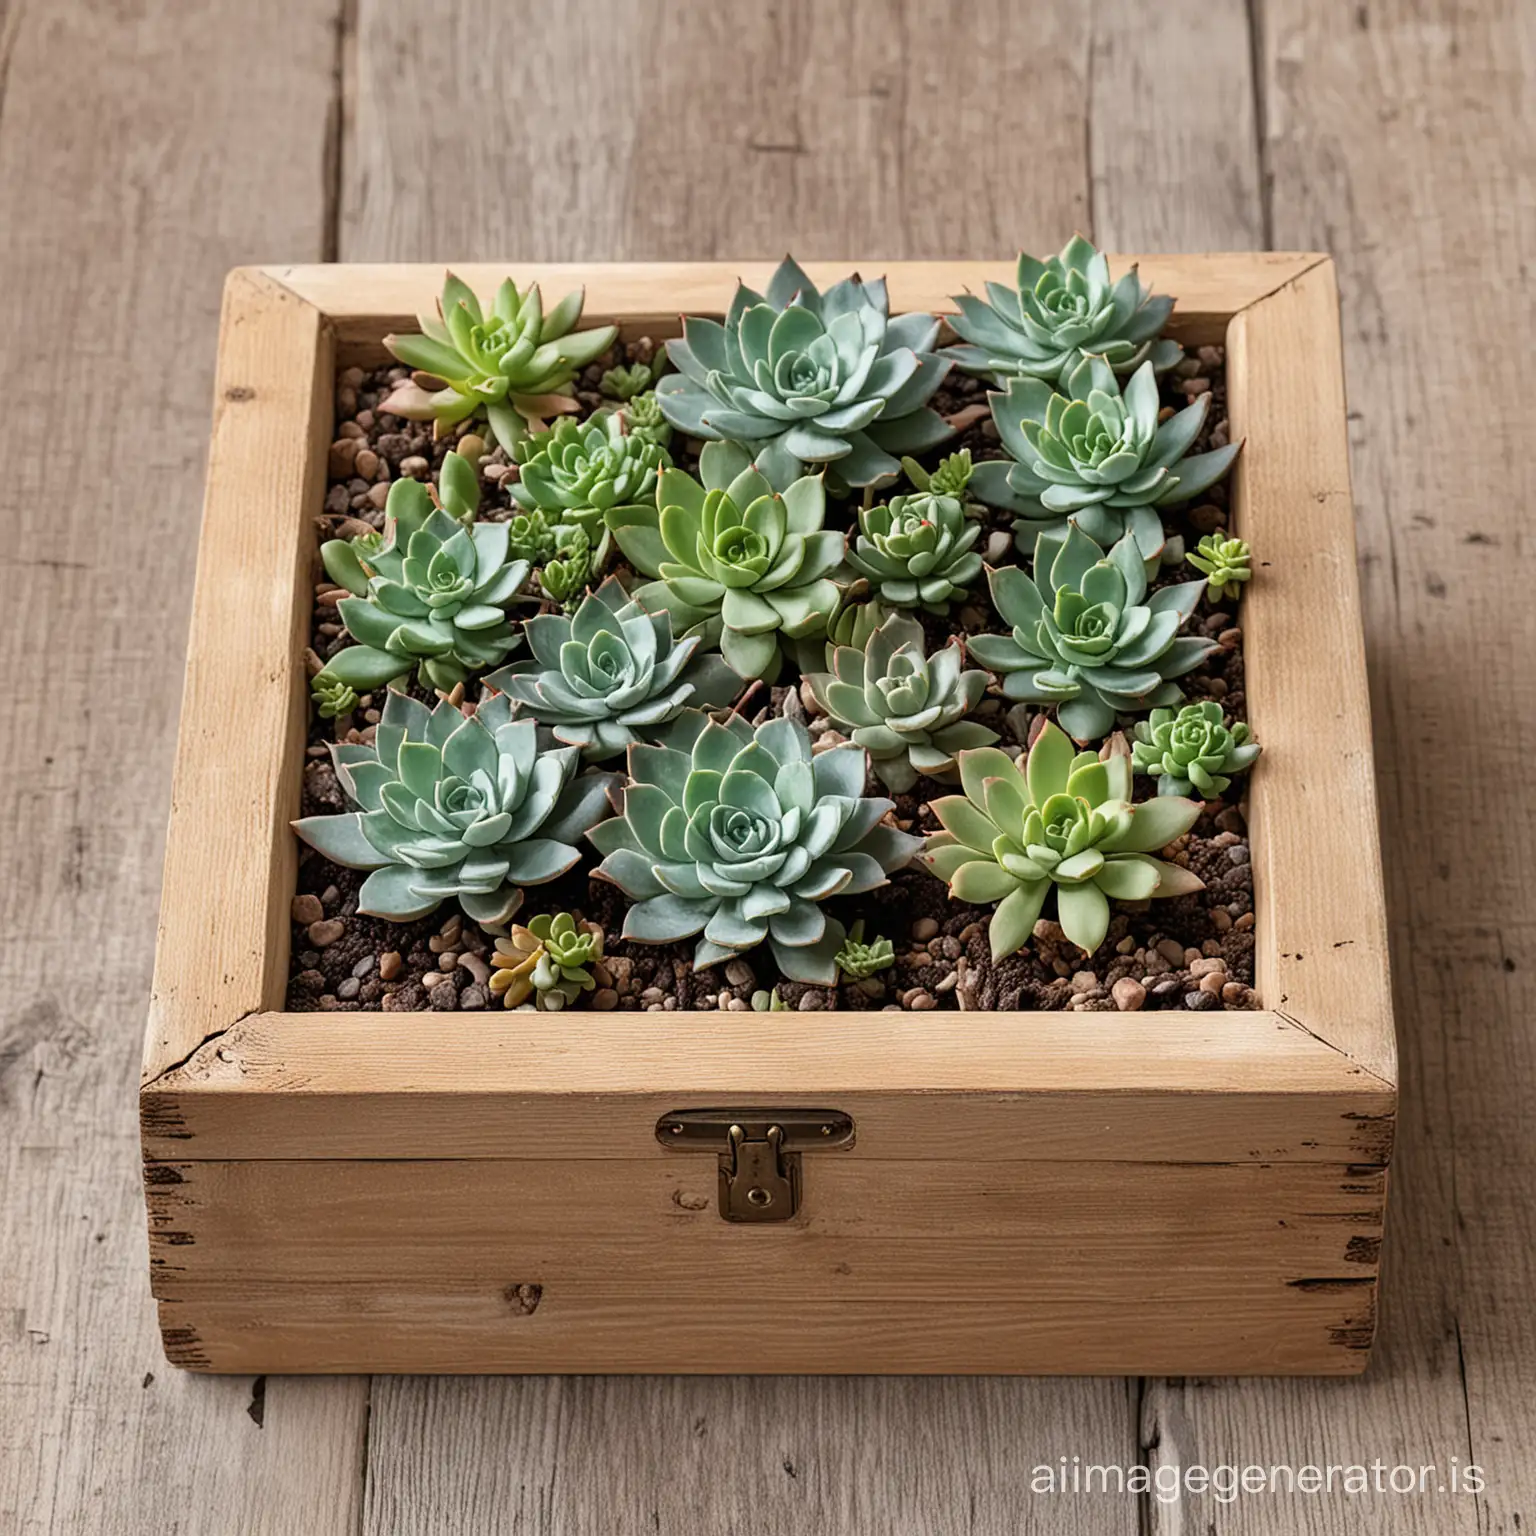 a small worn and rustic, square wooden box for a centerpiece container filled with succulents for a simple, rustic centerpiece